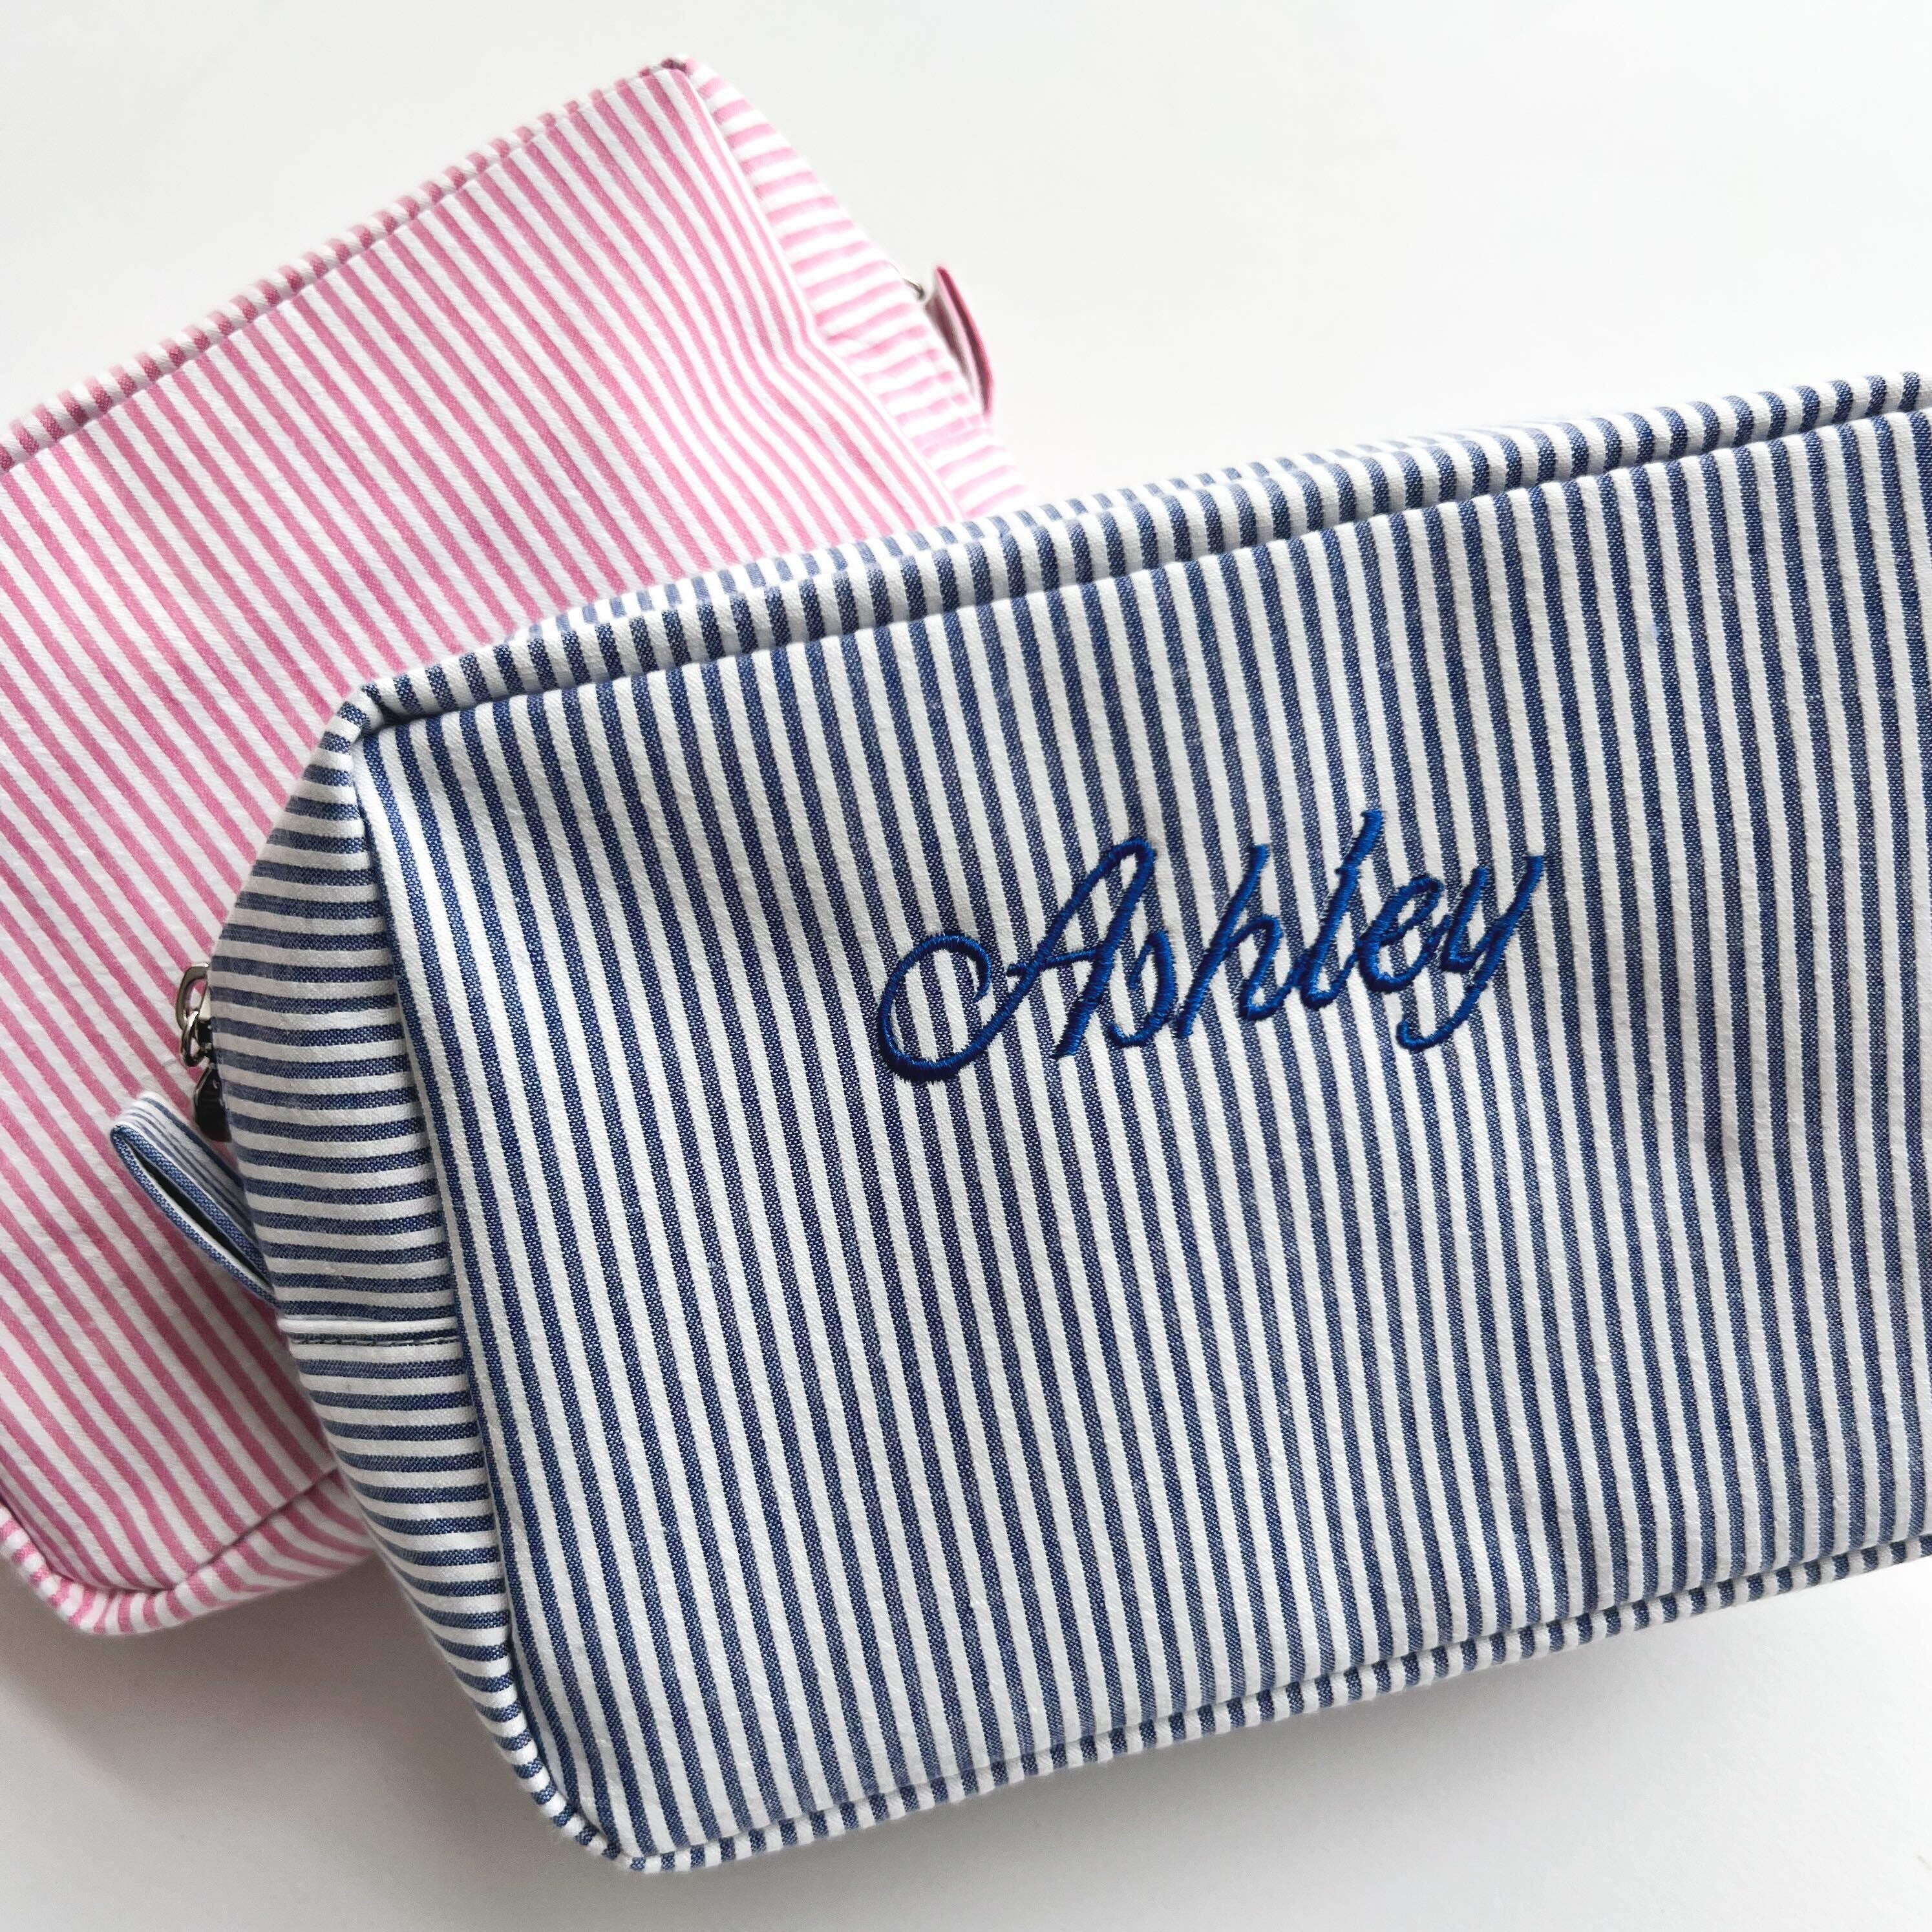 Pink Striped Makeup Bag with navy striped bag on top of it